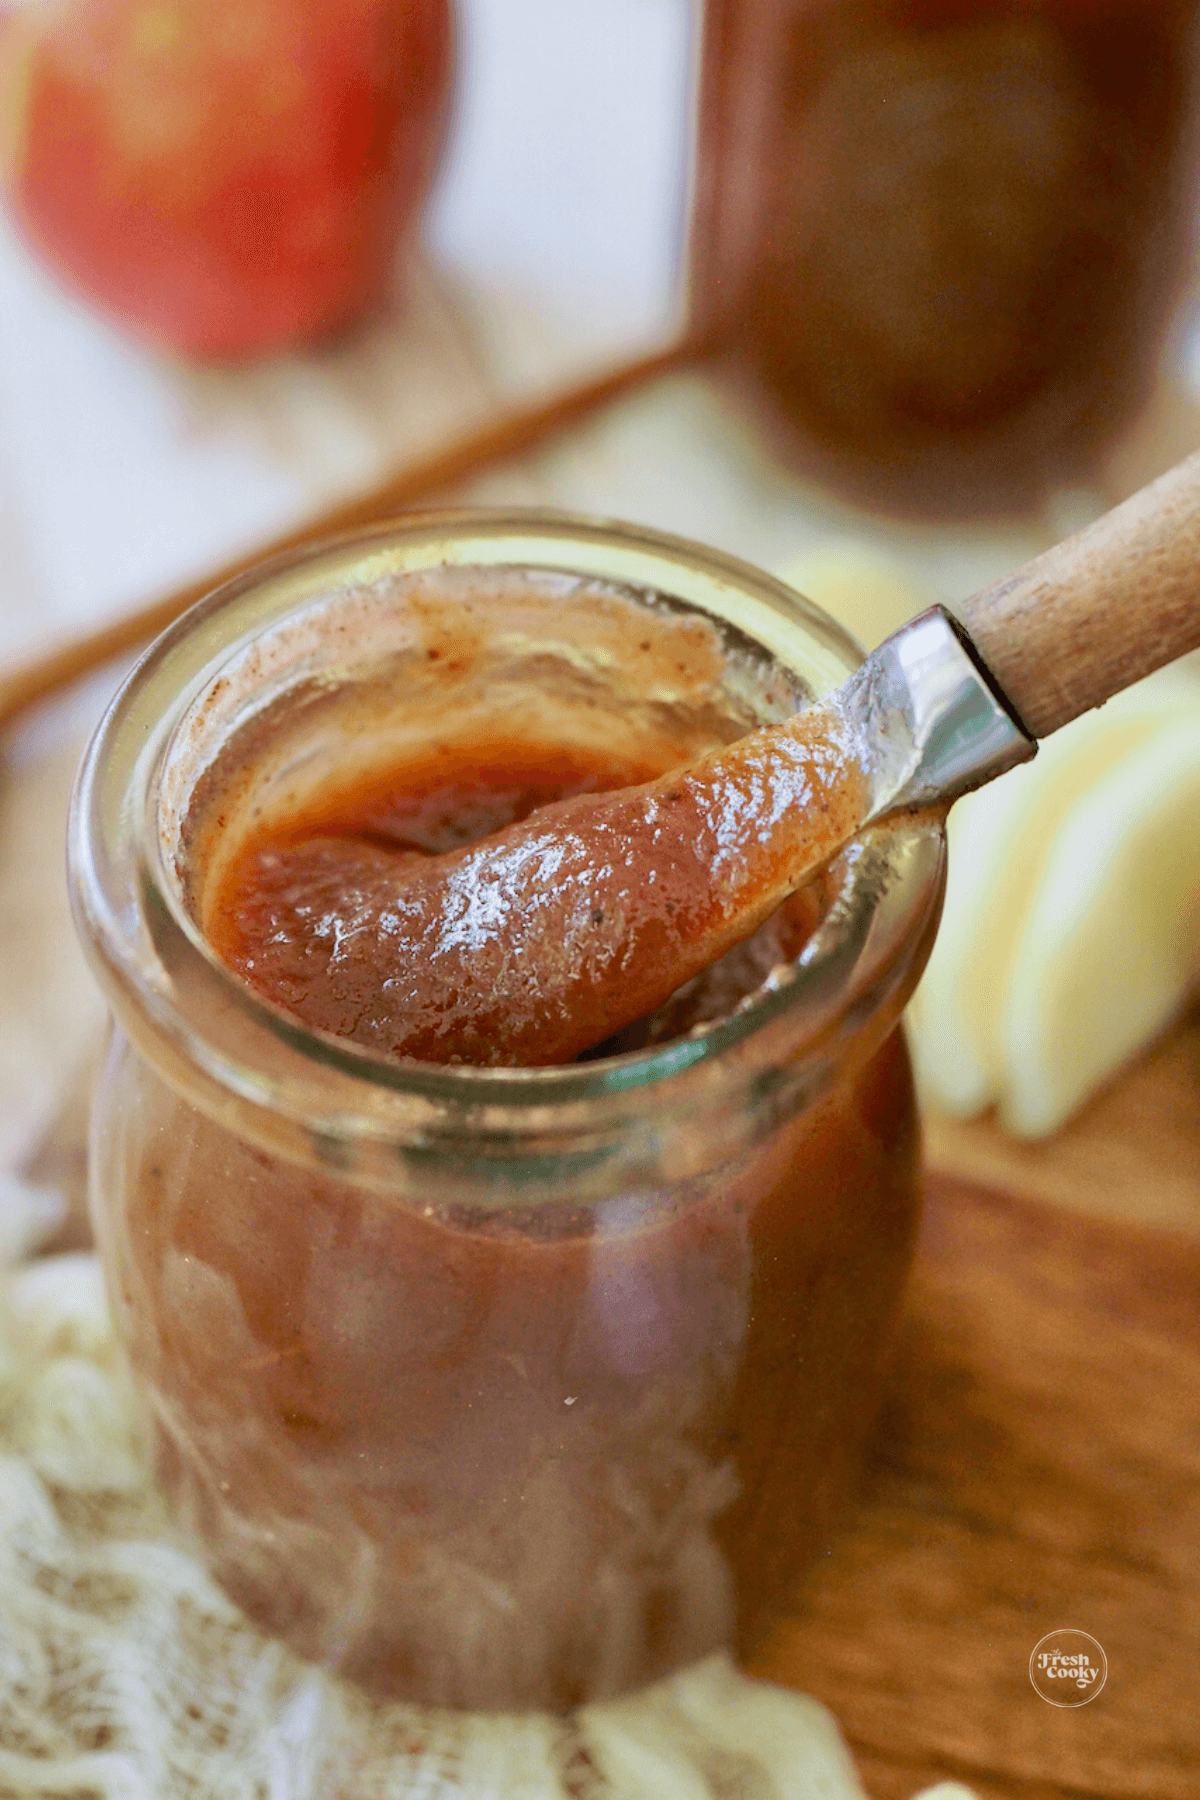 Apple Butter in jar with serving knife.